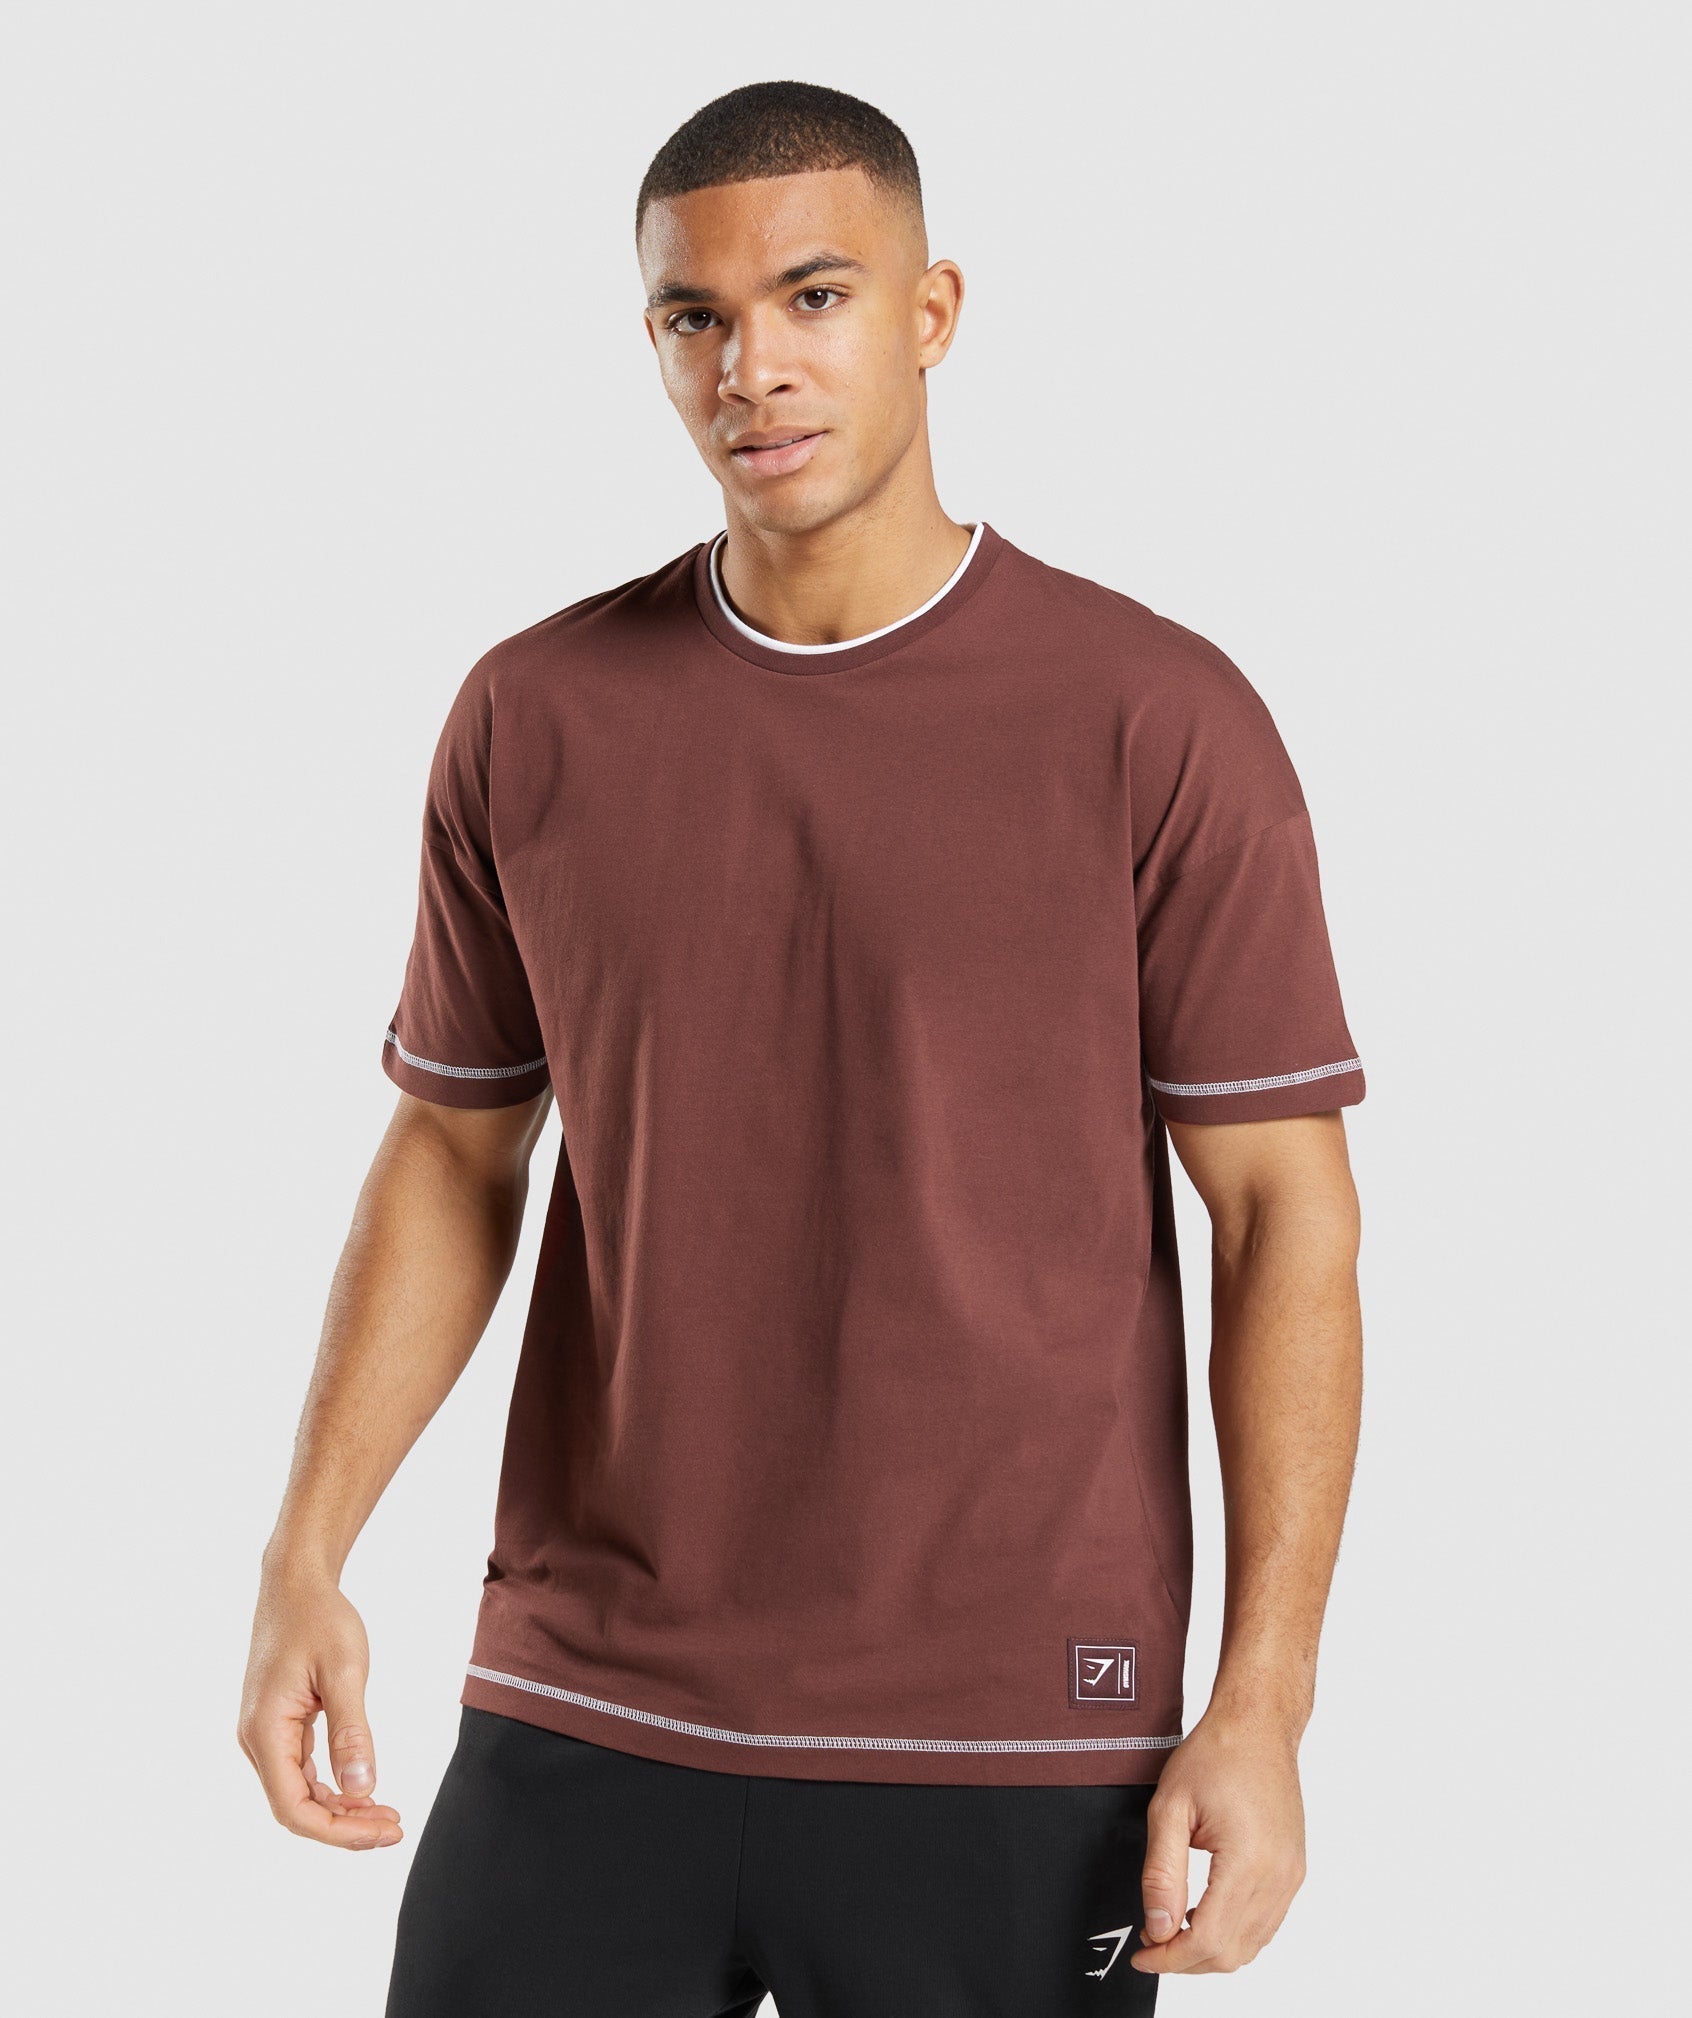 Recess T-Shirt in Cherry Brown/White - view 2